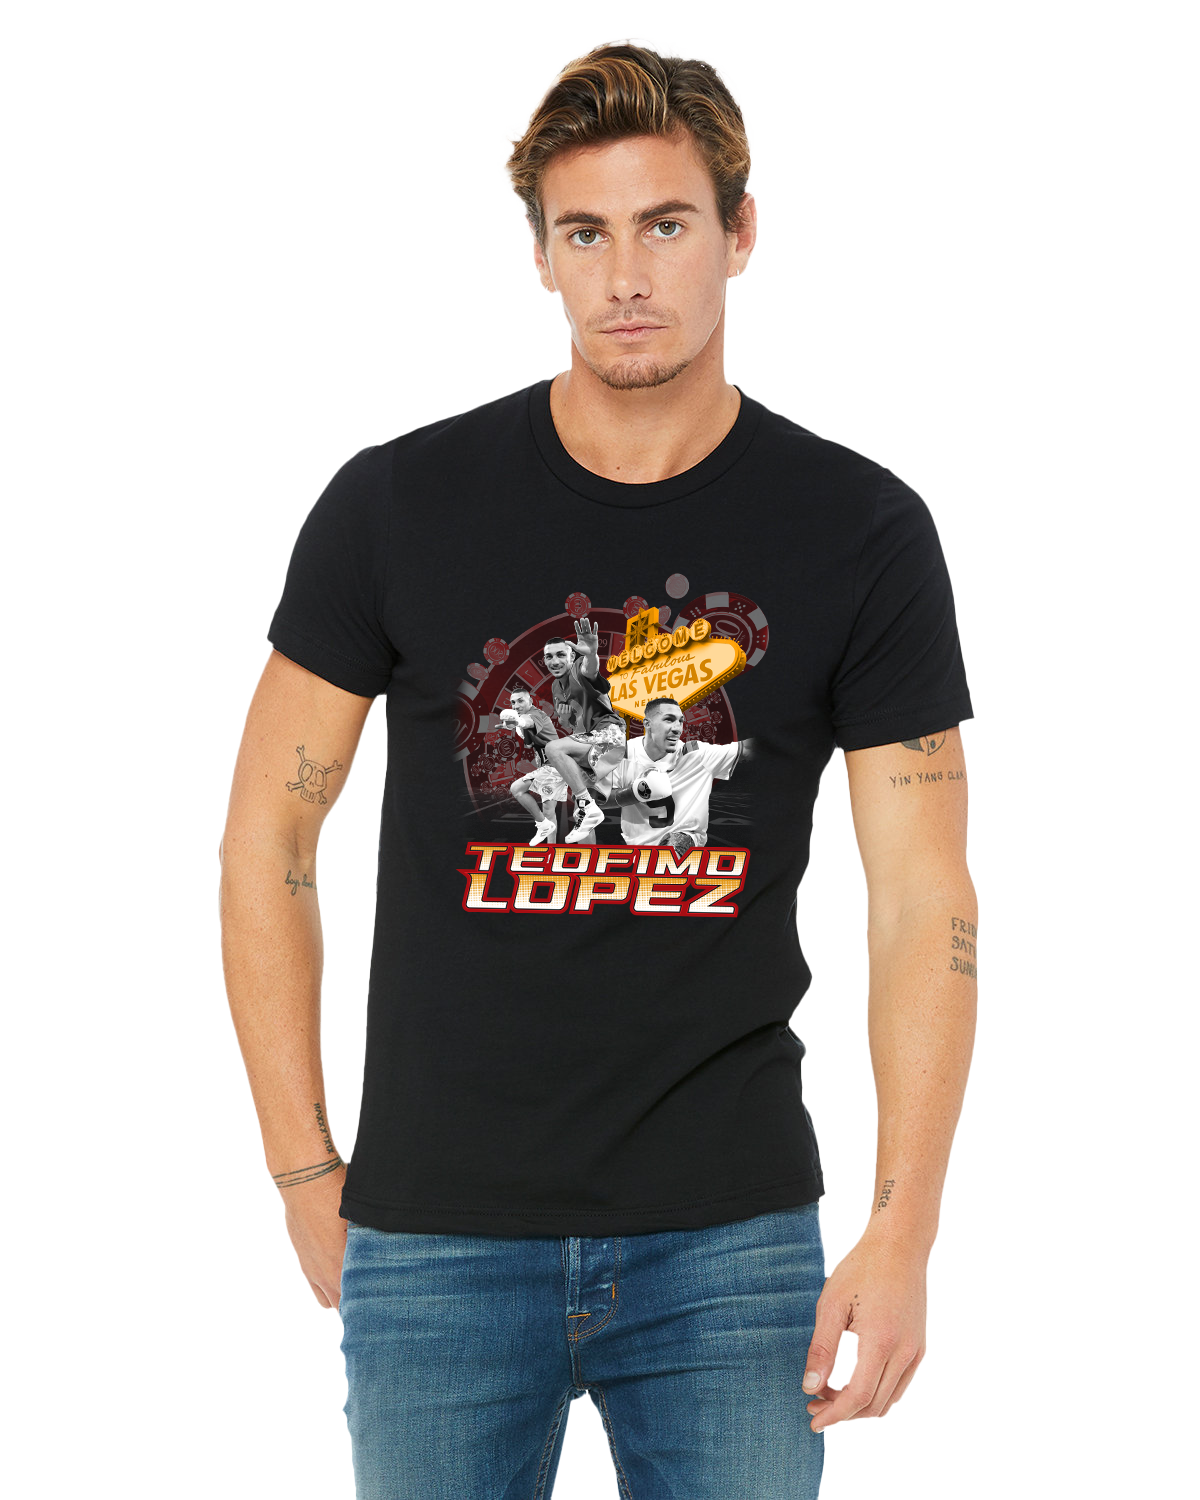 Limited Run Teofimo Lopez Solo  Fight T-Shirt